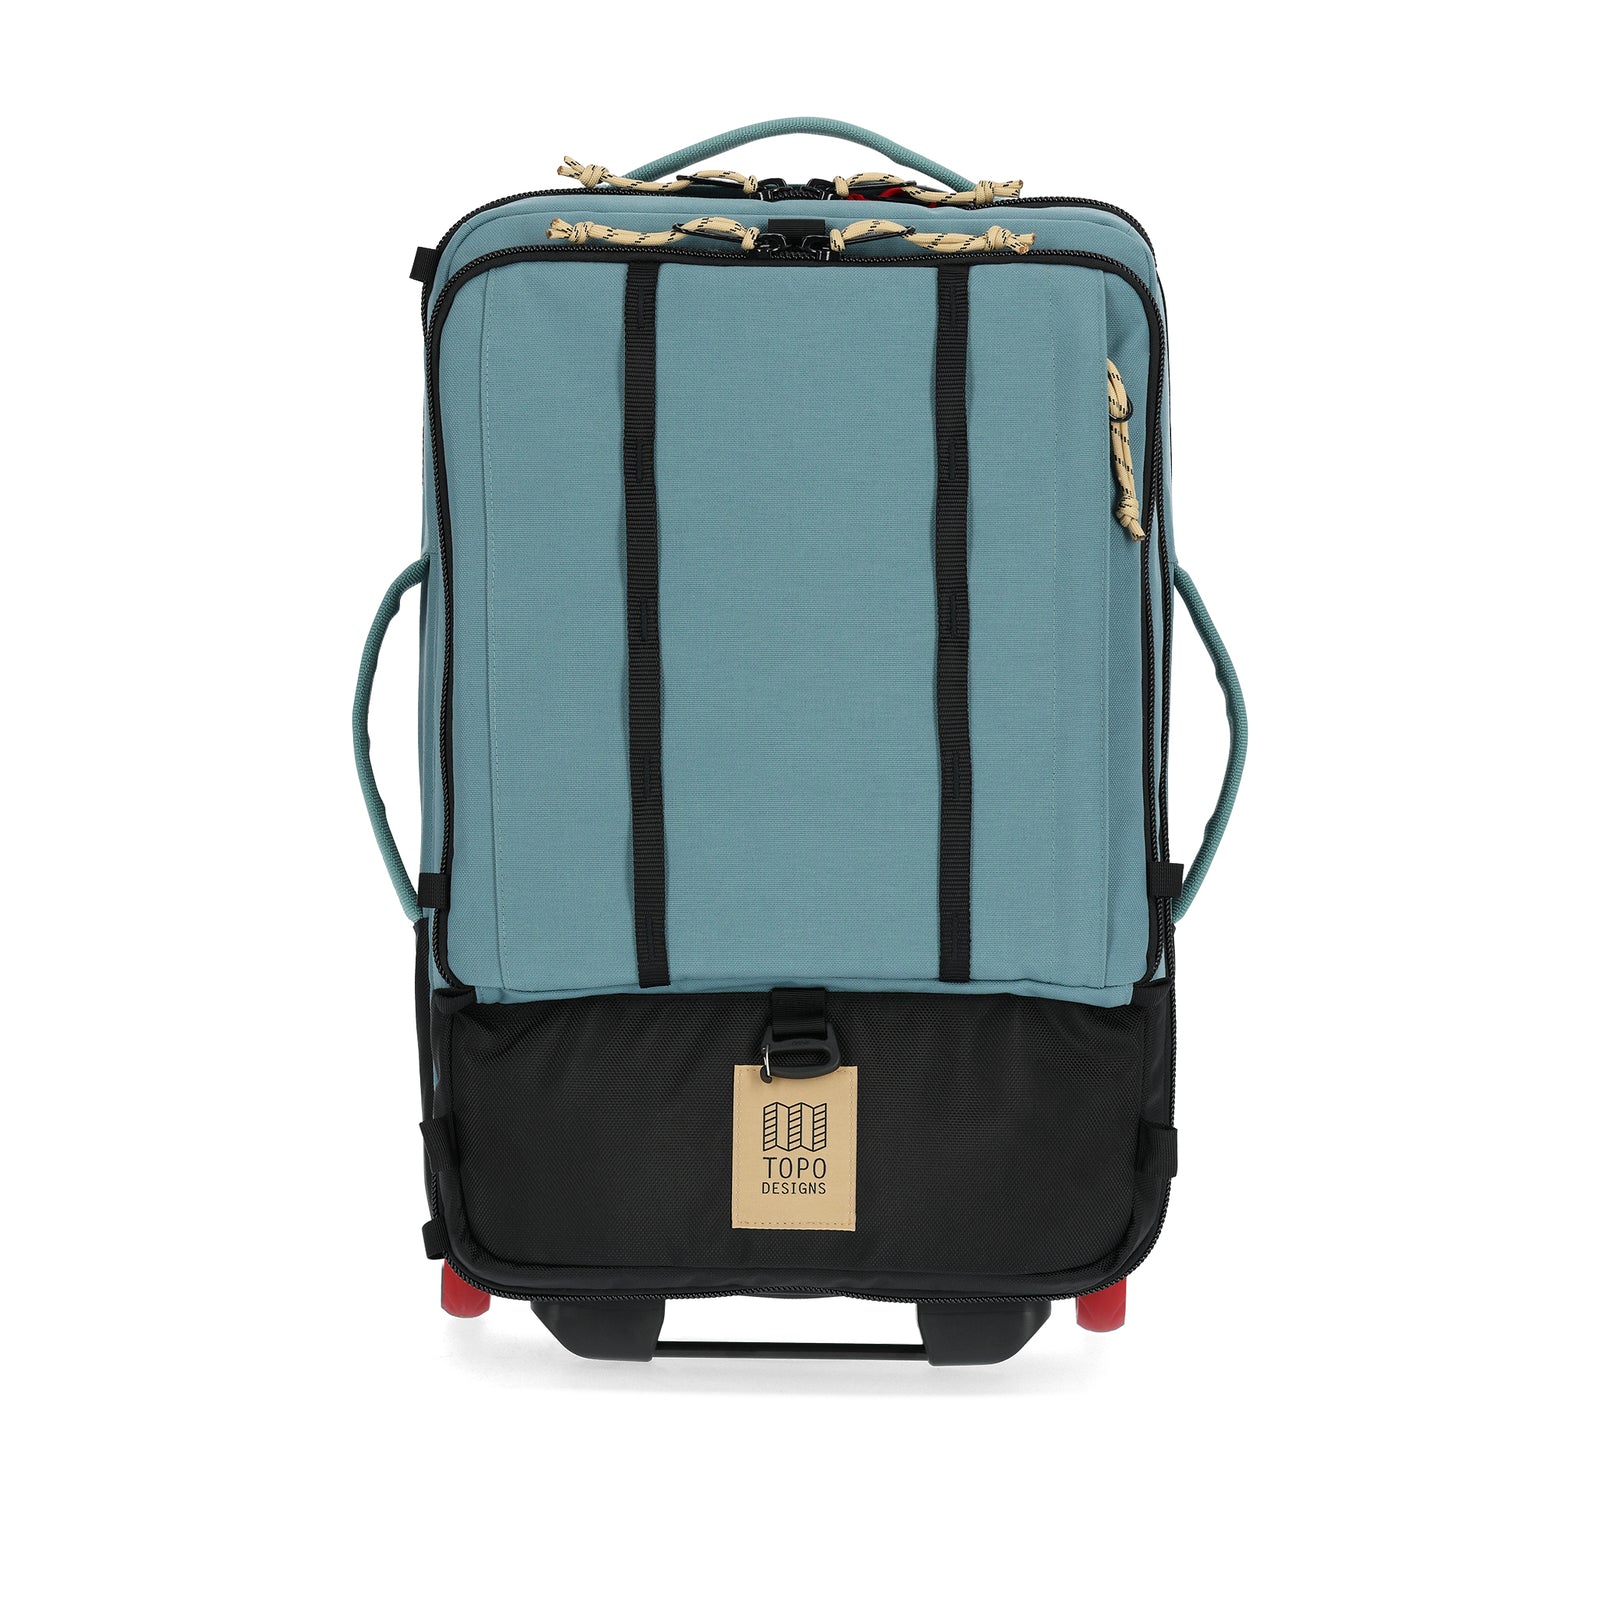 Front View of Topo Designs Global Travel Bag Roller  in "Sea Pine"